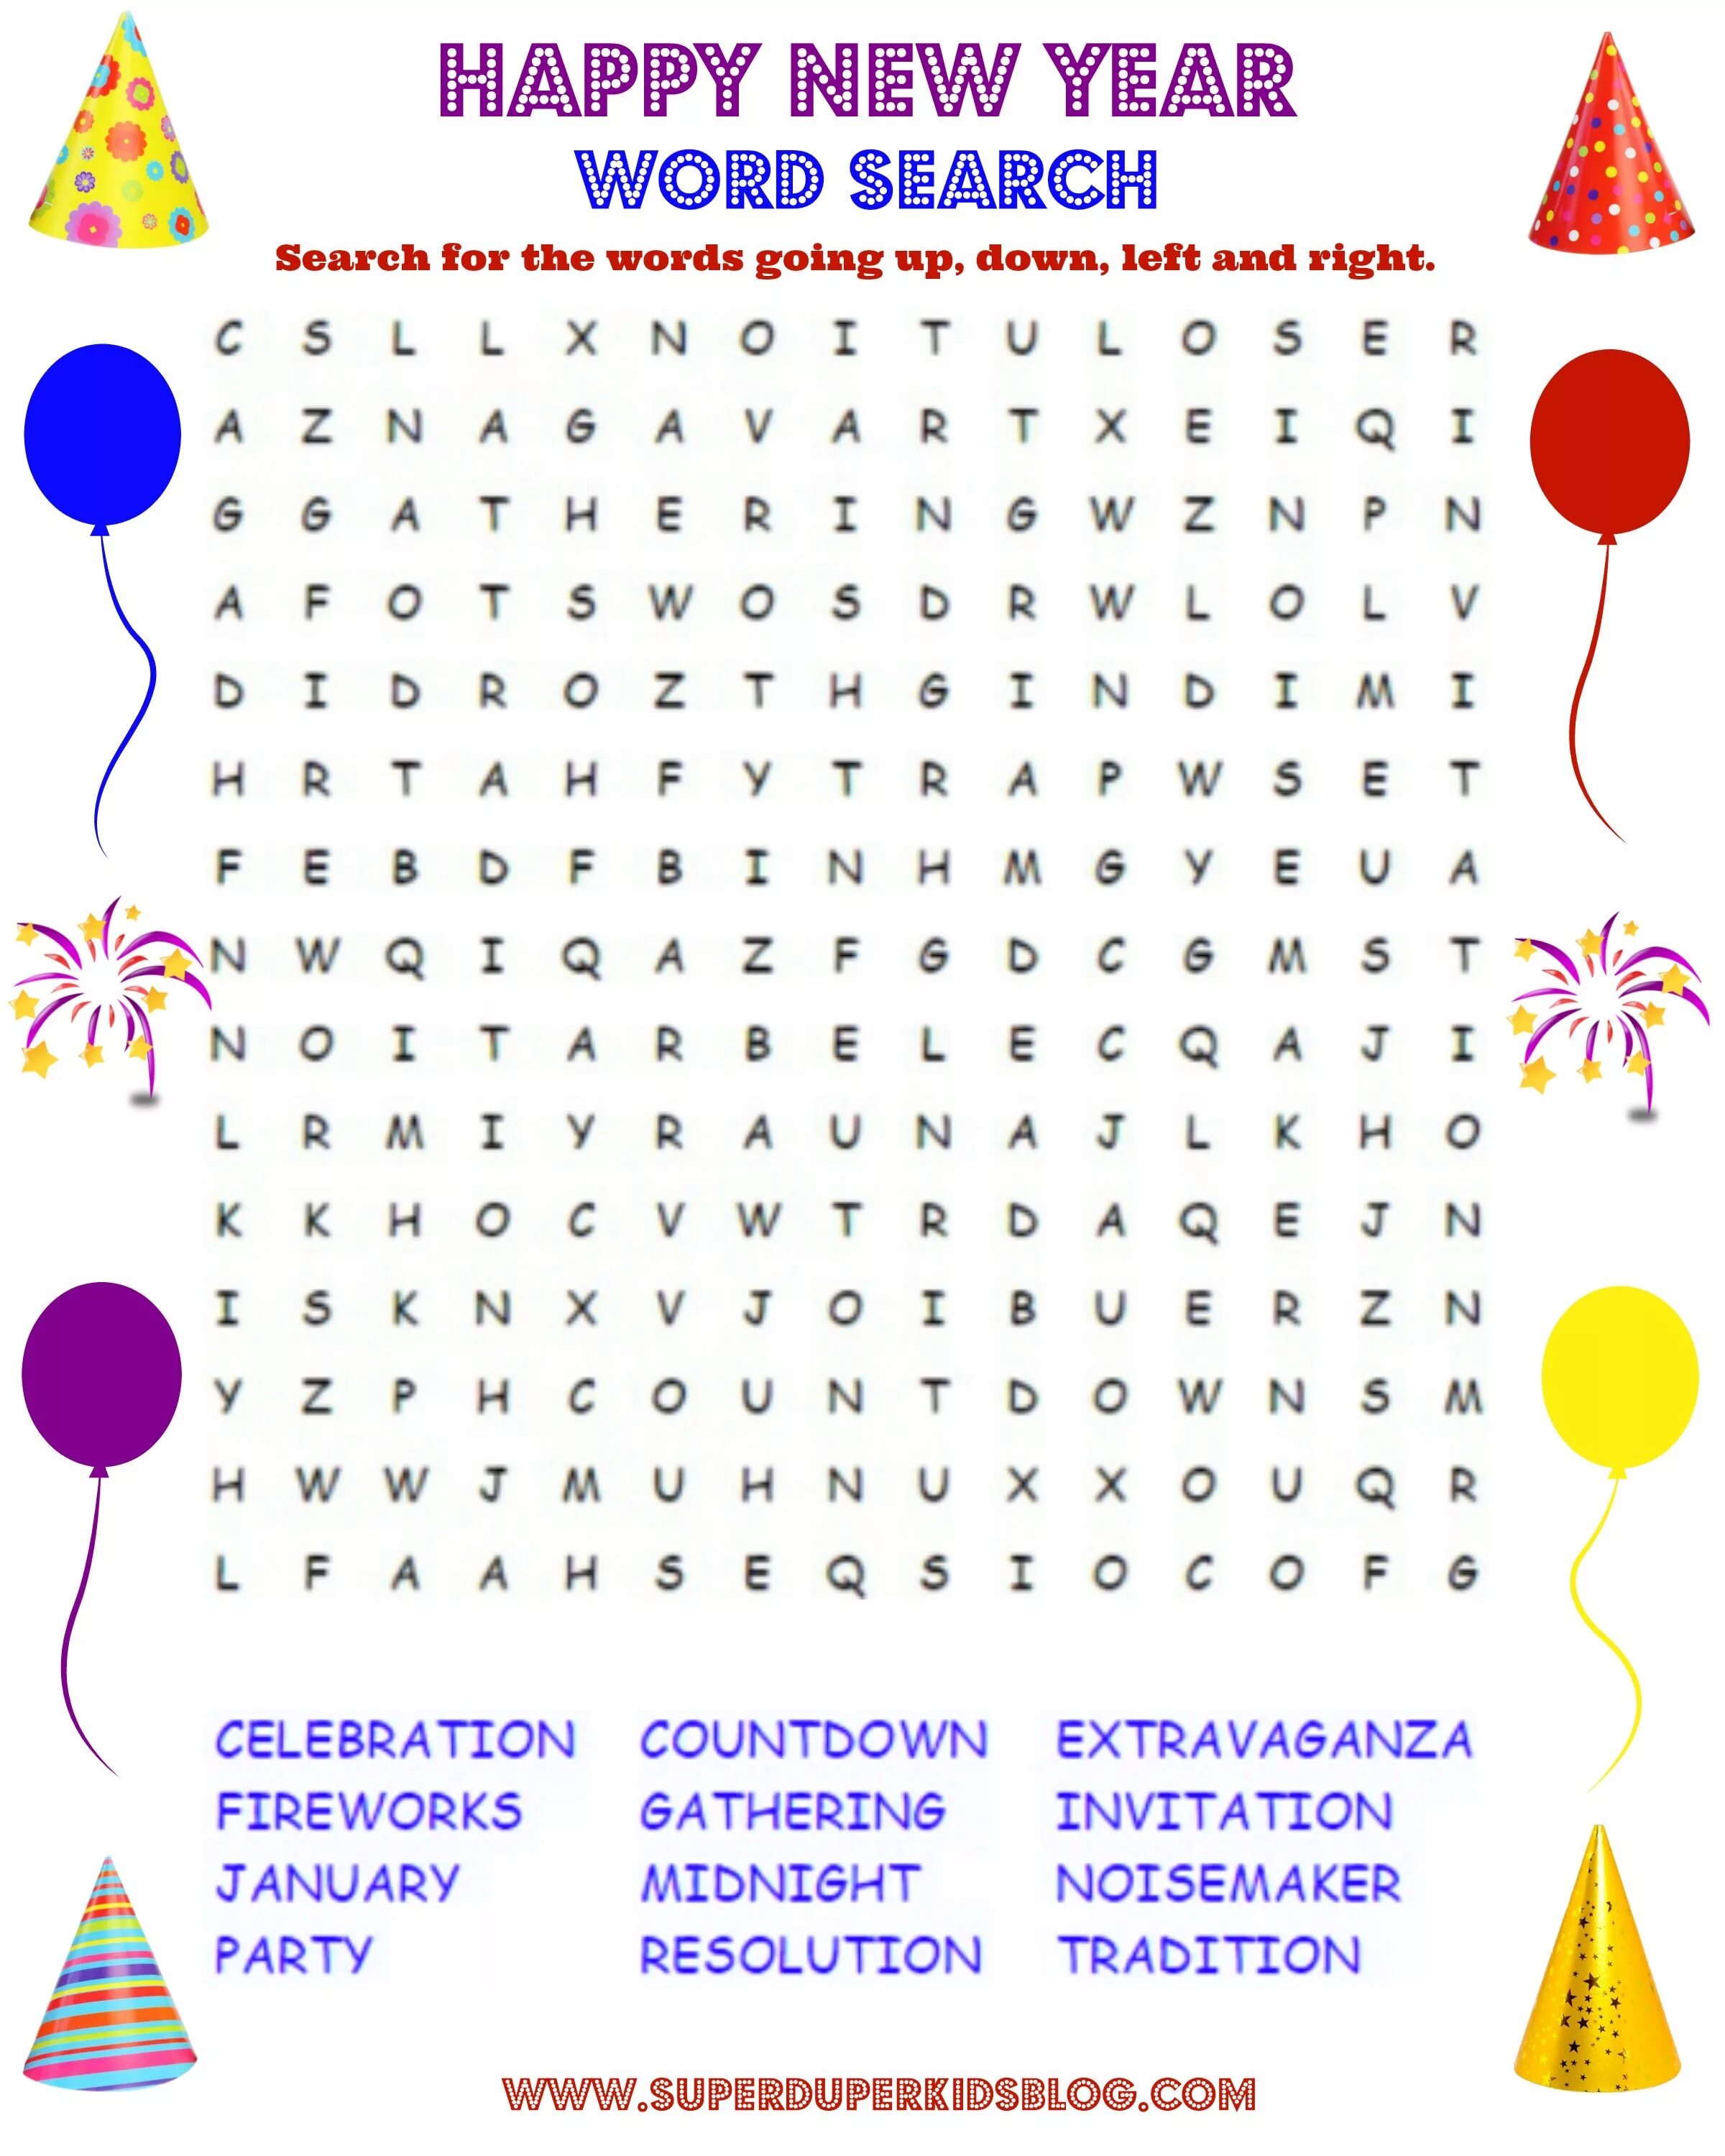 Найди слово новый год. New year Word search. New year Wordsearch for Kids. New year Word search for Kids. Wordsearch Happy New year.